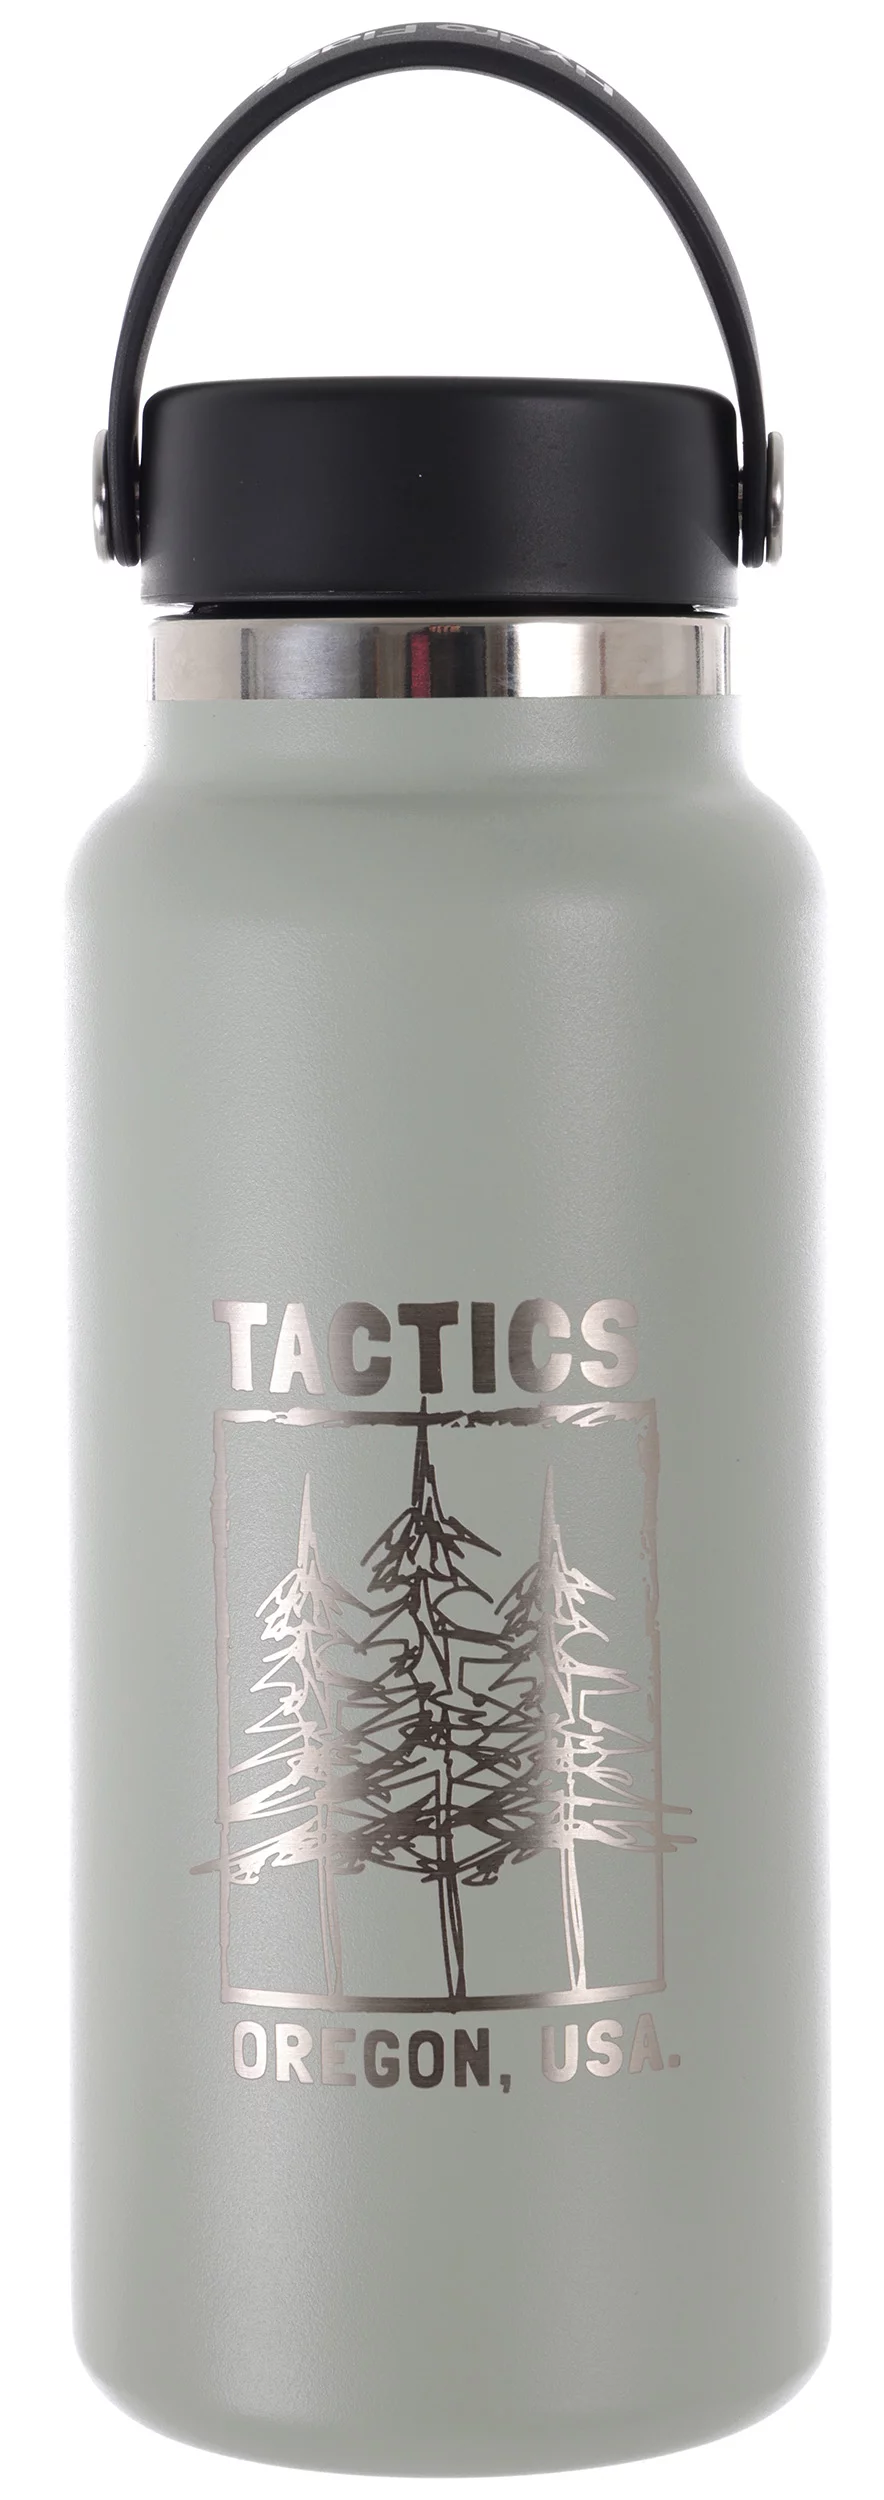 Hydro Flask Water Bottle 32 oz Wide Mouth, Stainless Steel